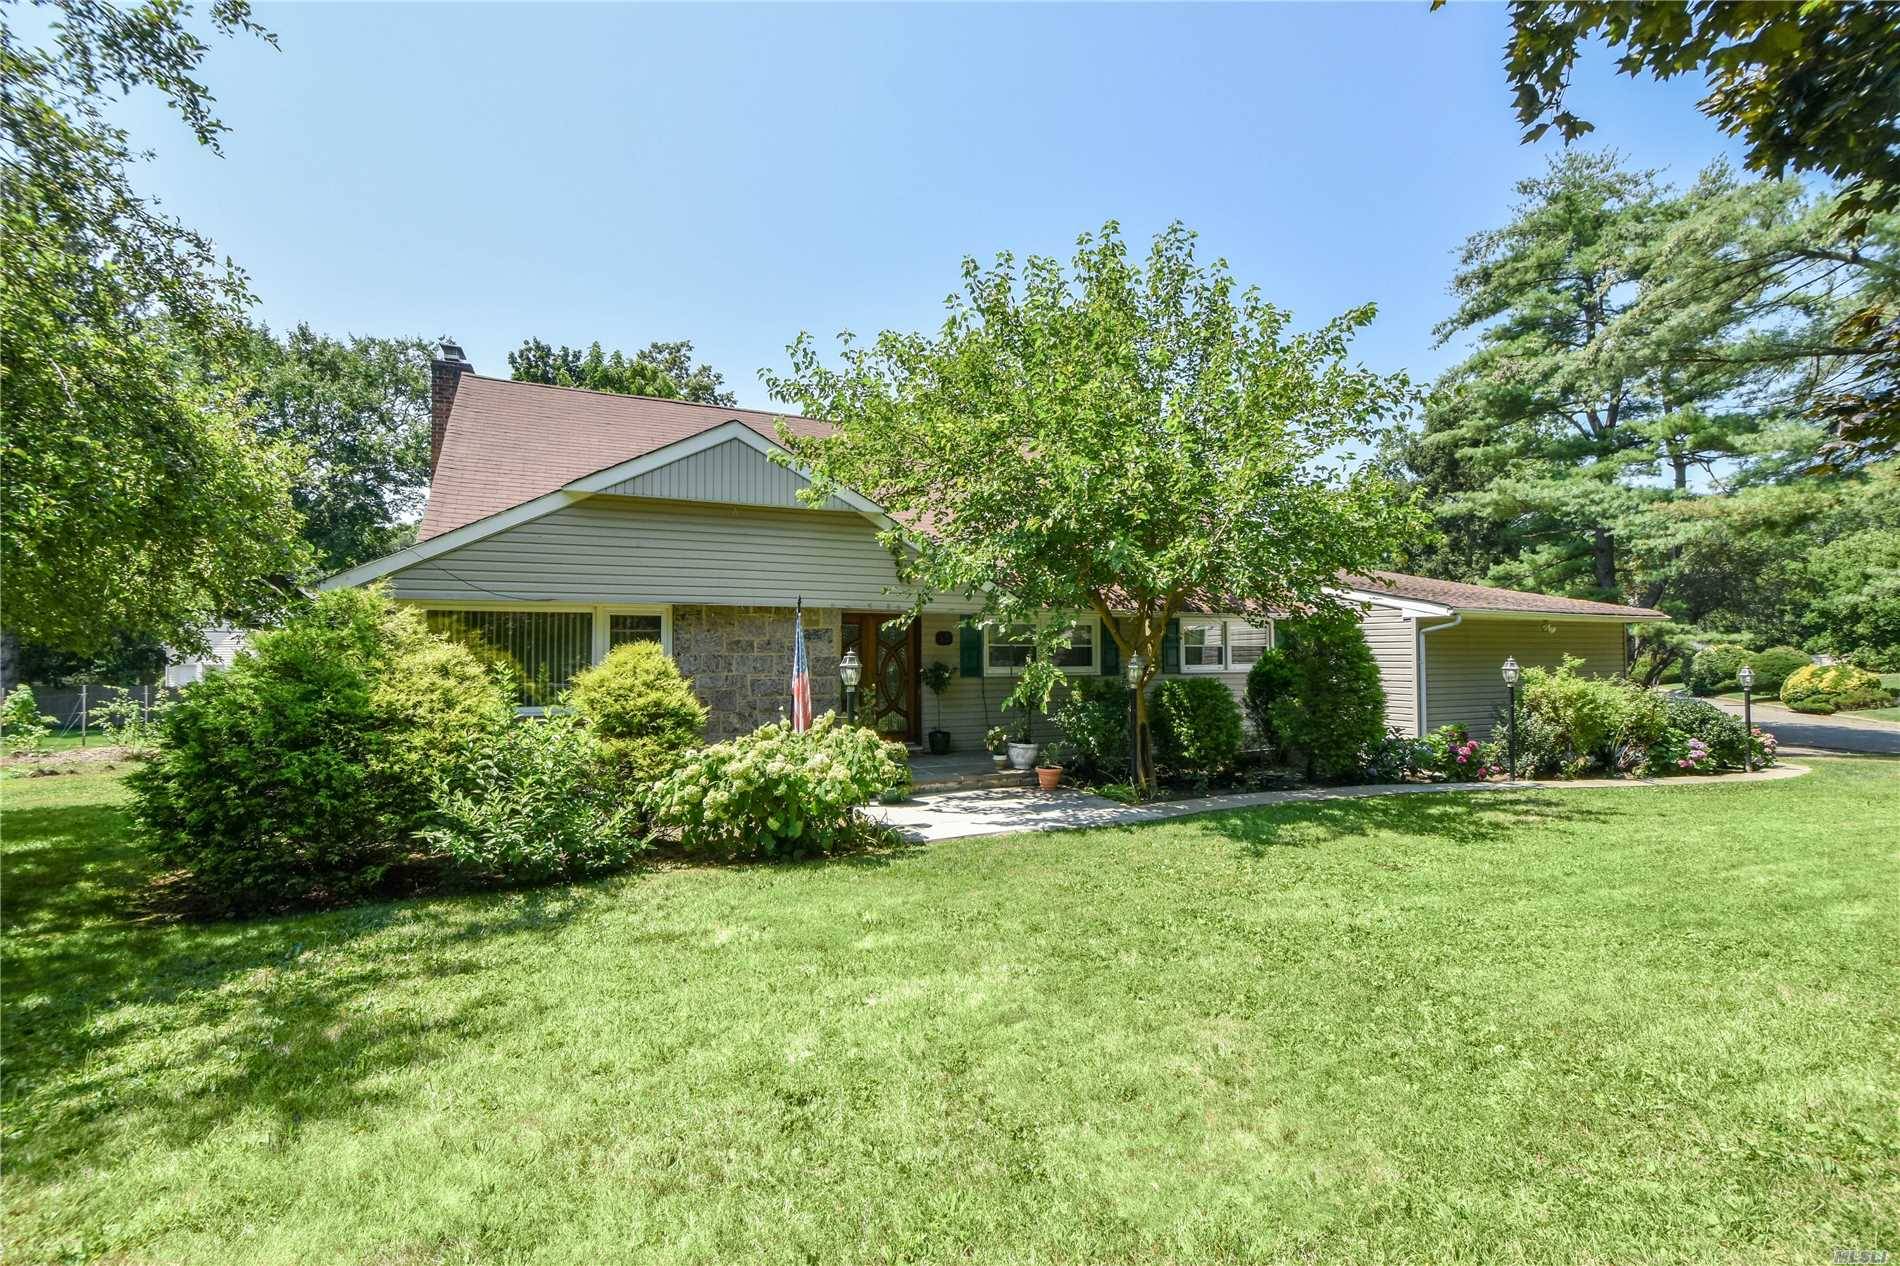 Nestled On 1/2 Acre Of Lush Property This Diamond Home Is Picture Perfect Inside & Out!